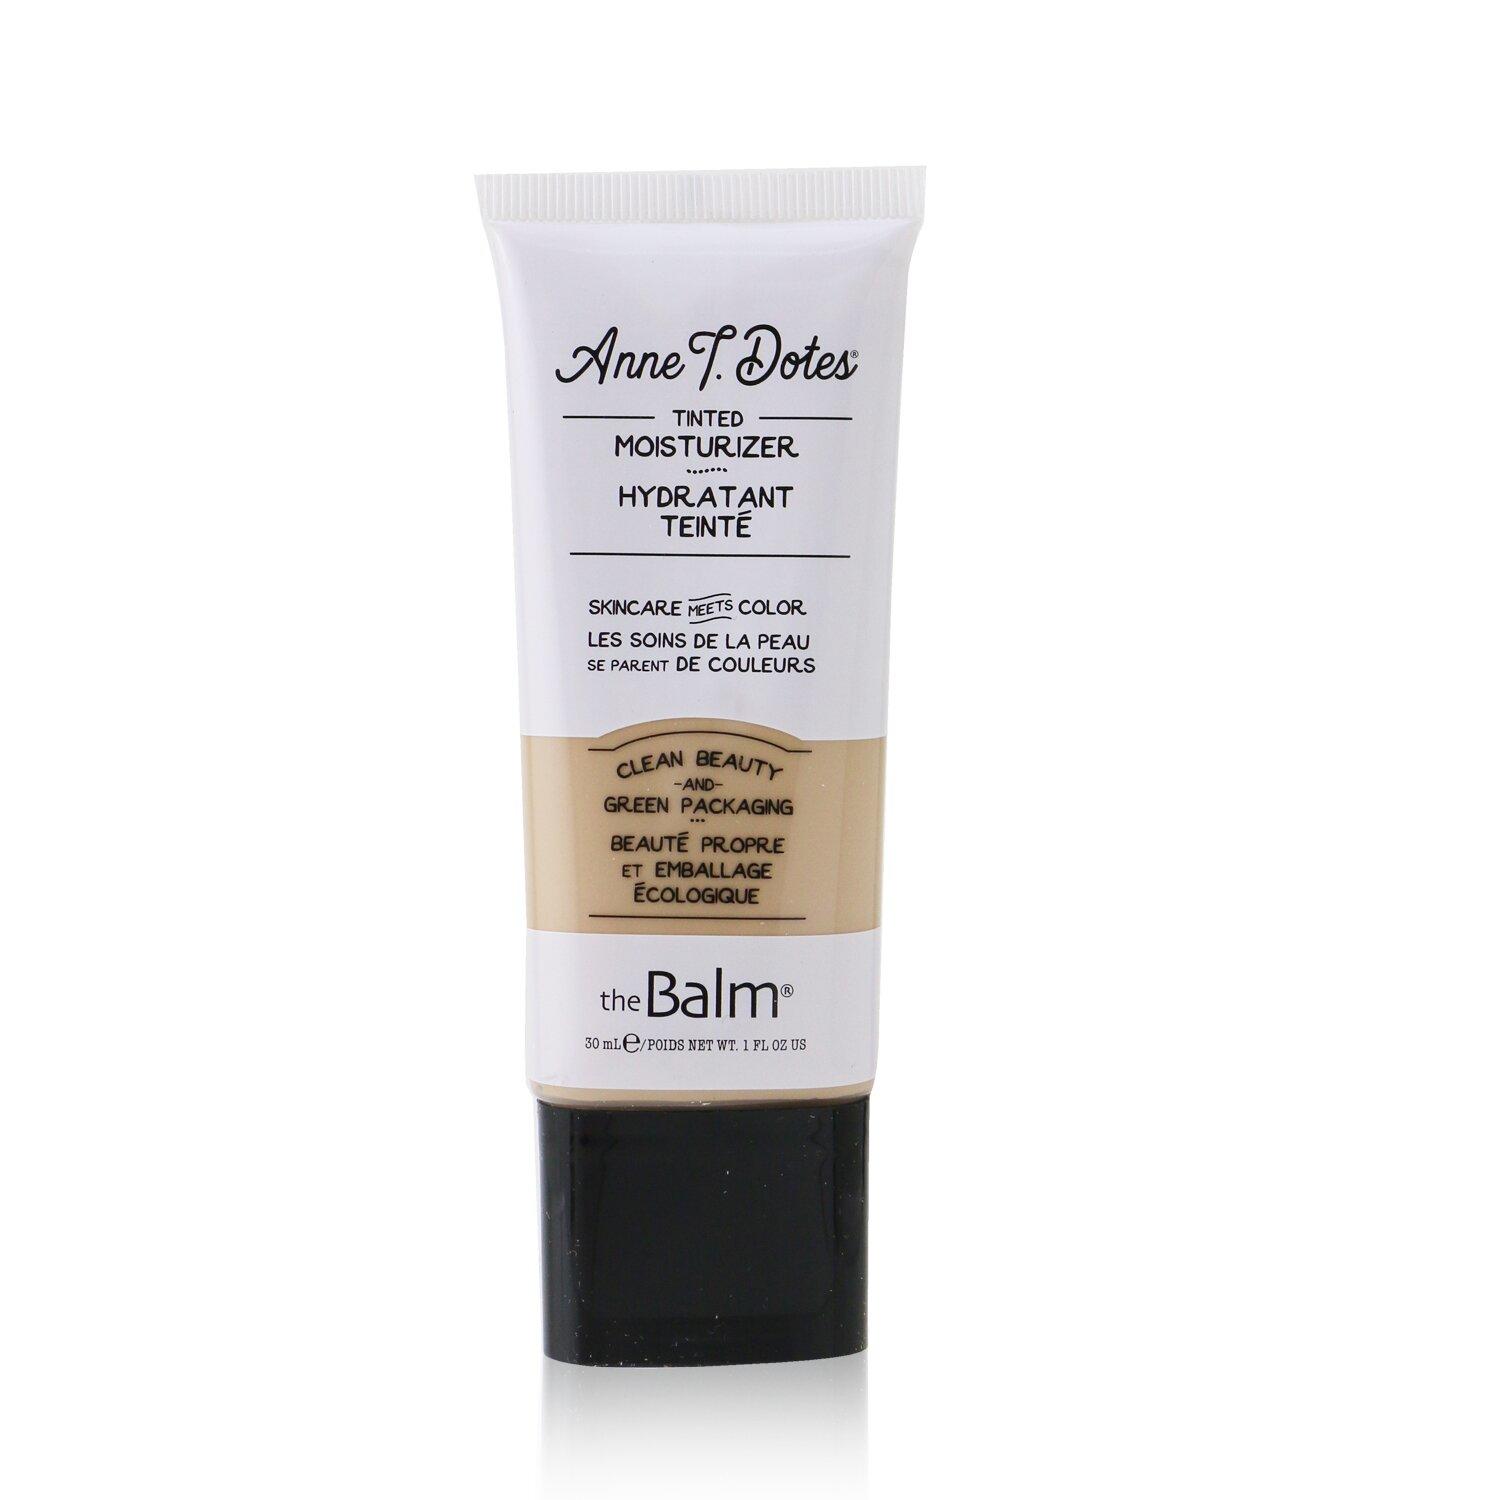 The Balm Anne T. Dotes Tinted Moisturizer 14